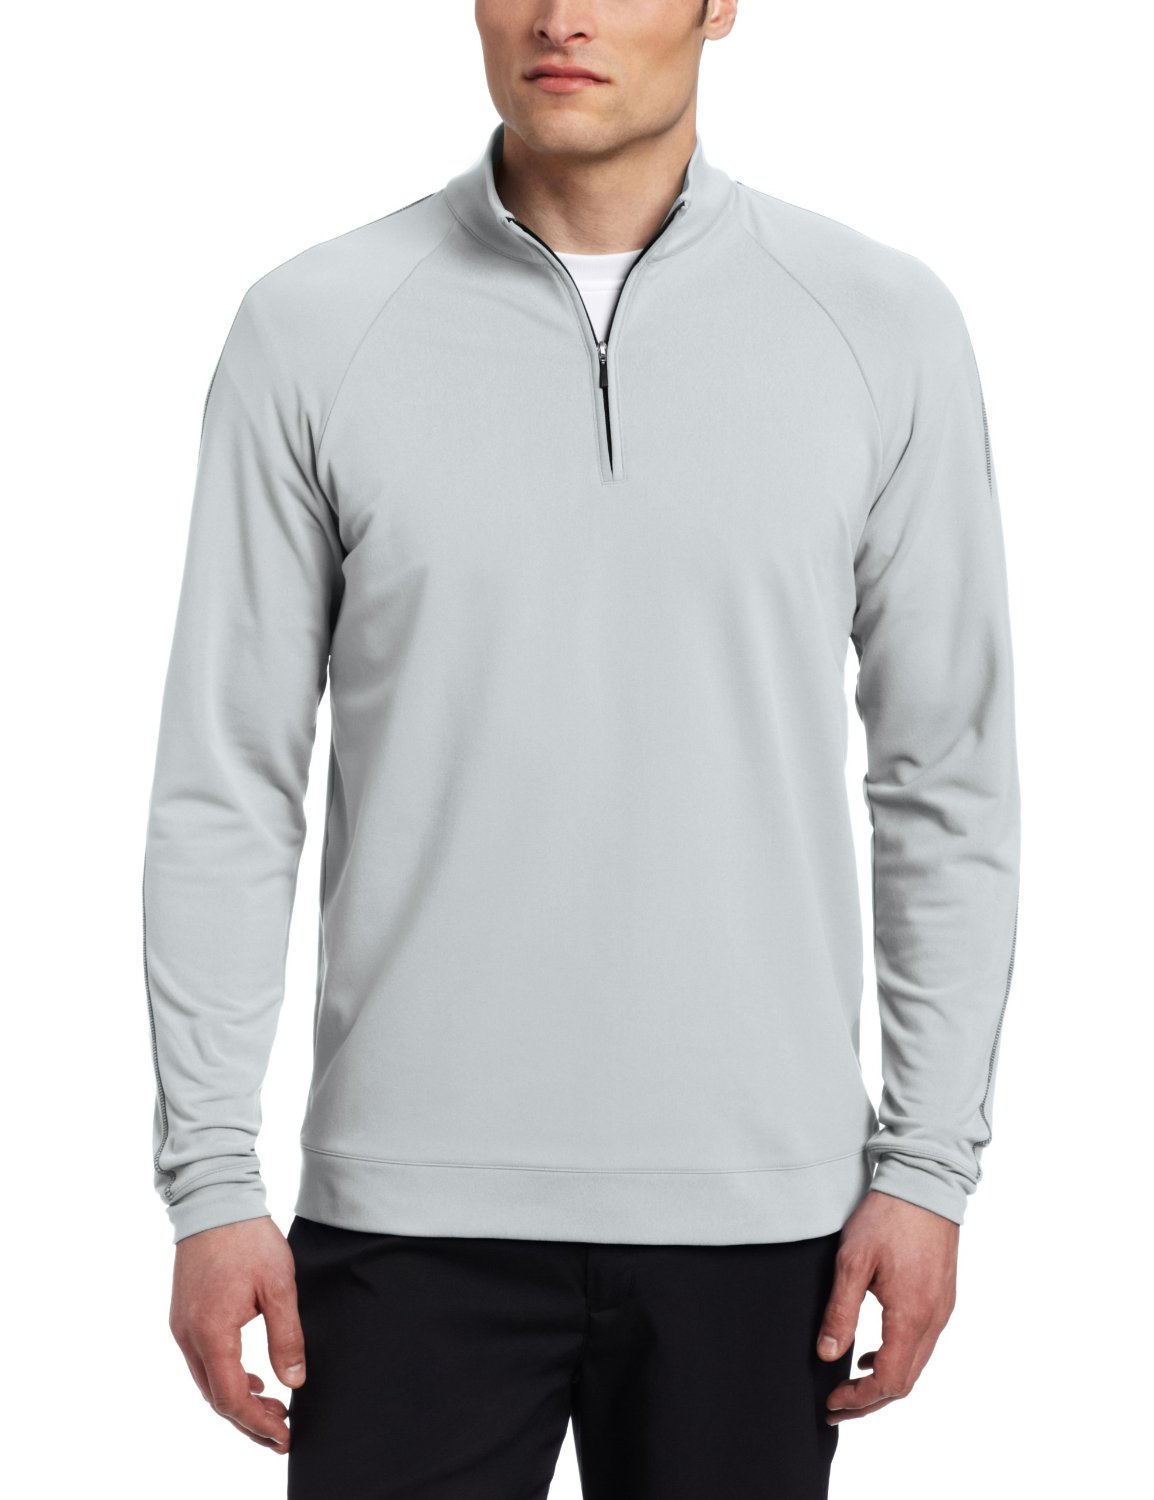 Mens Climalite Contrast Stitch Golf Pullovers